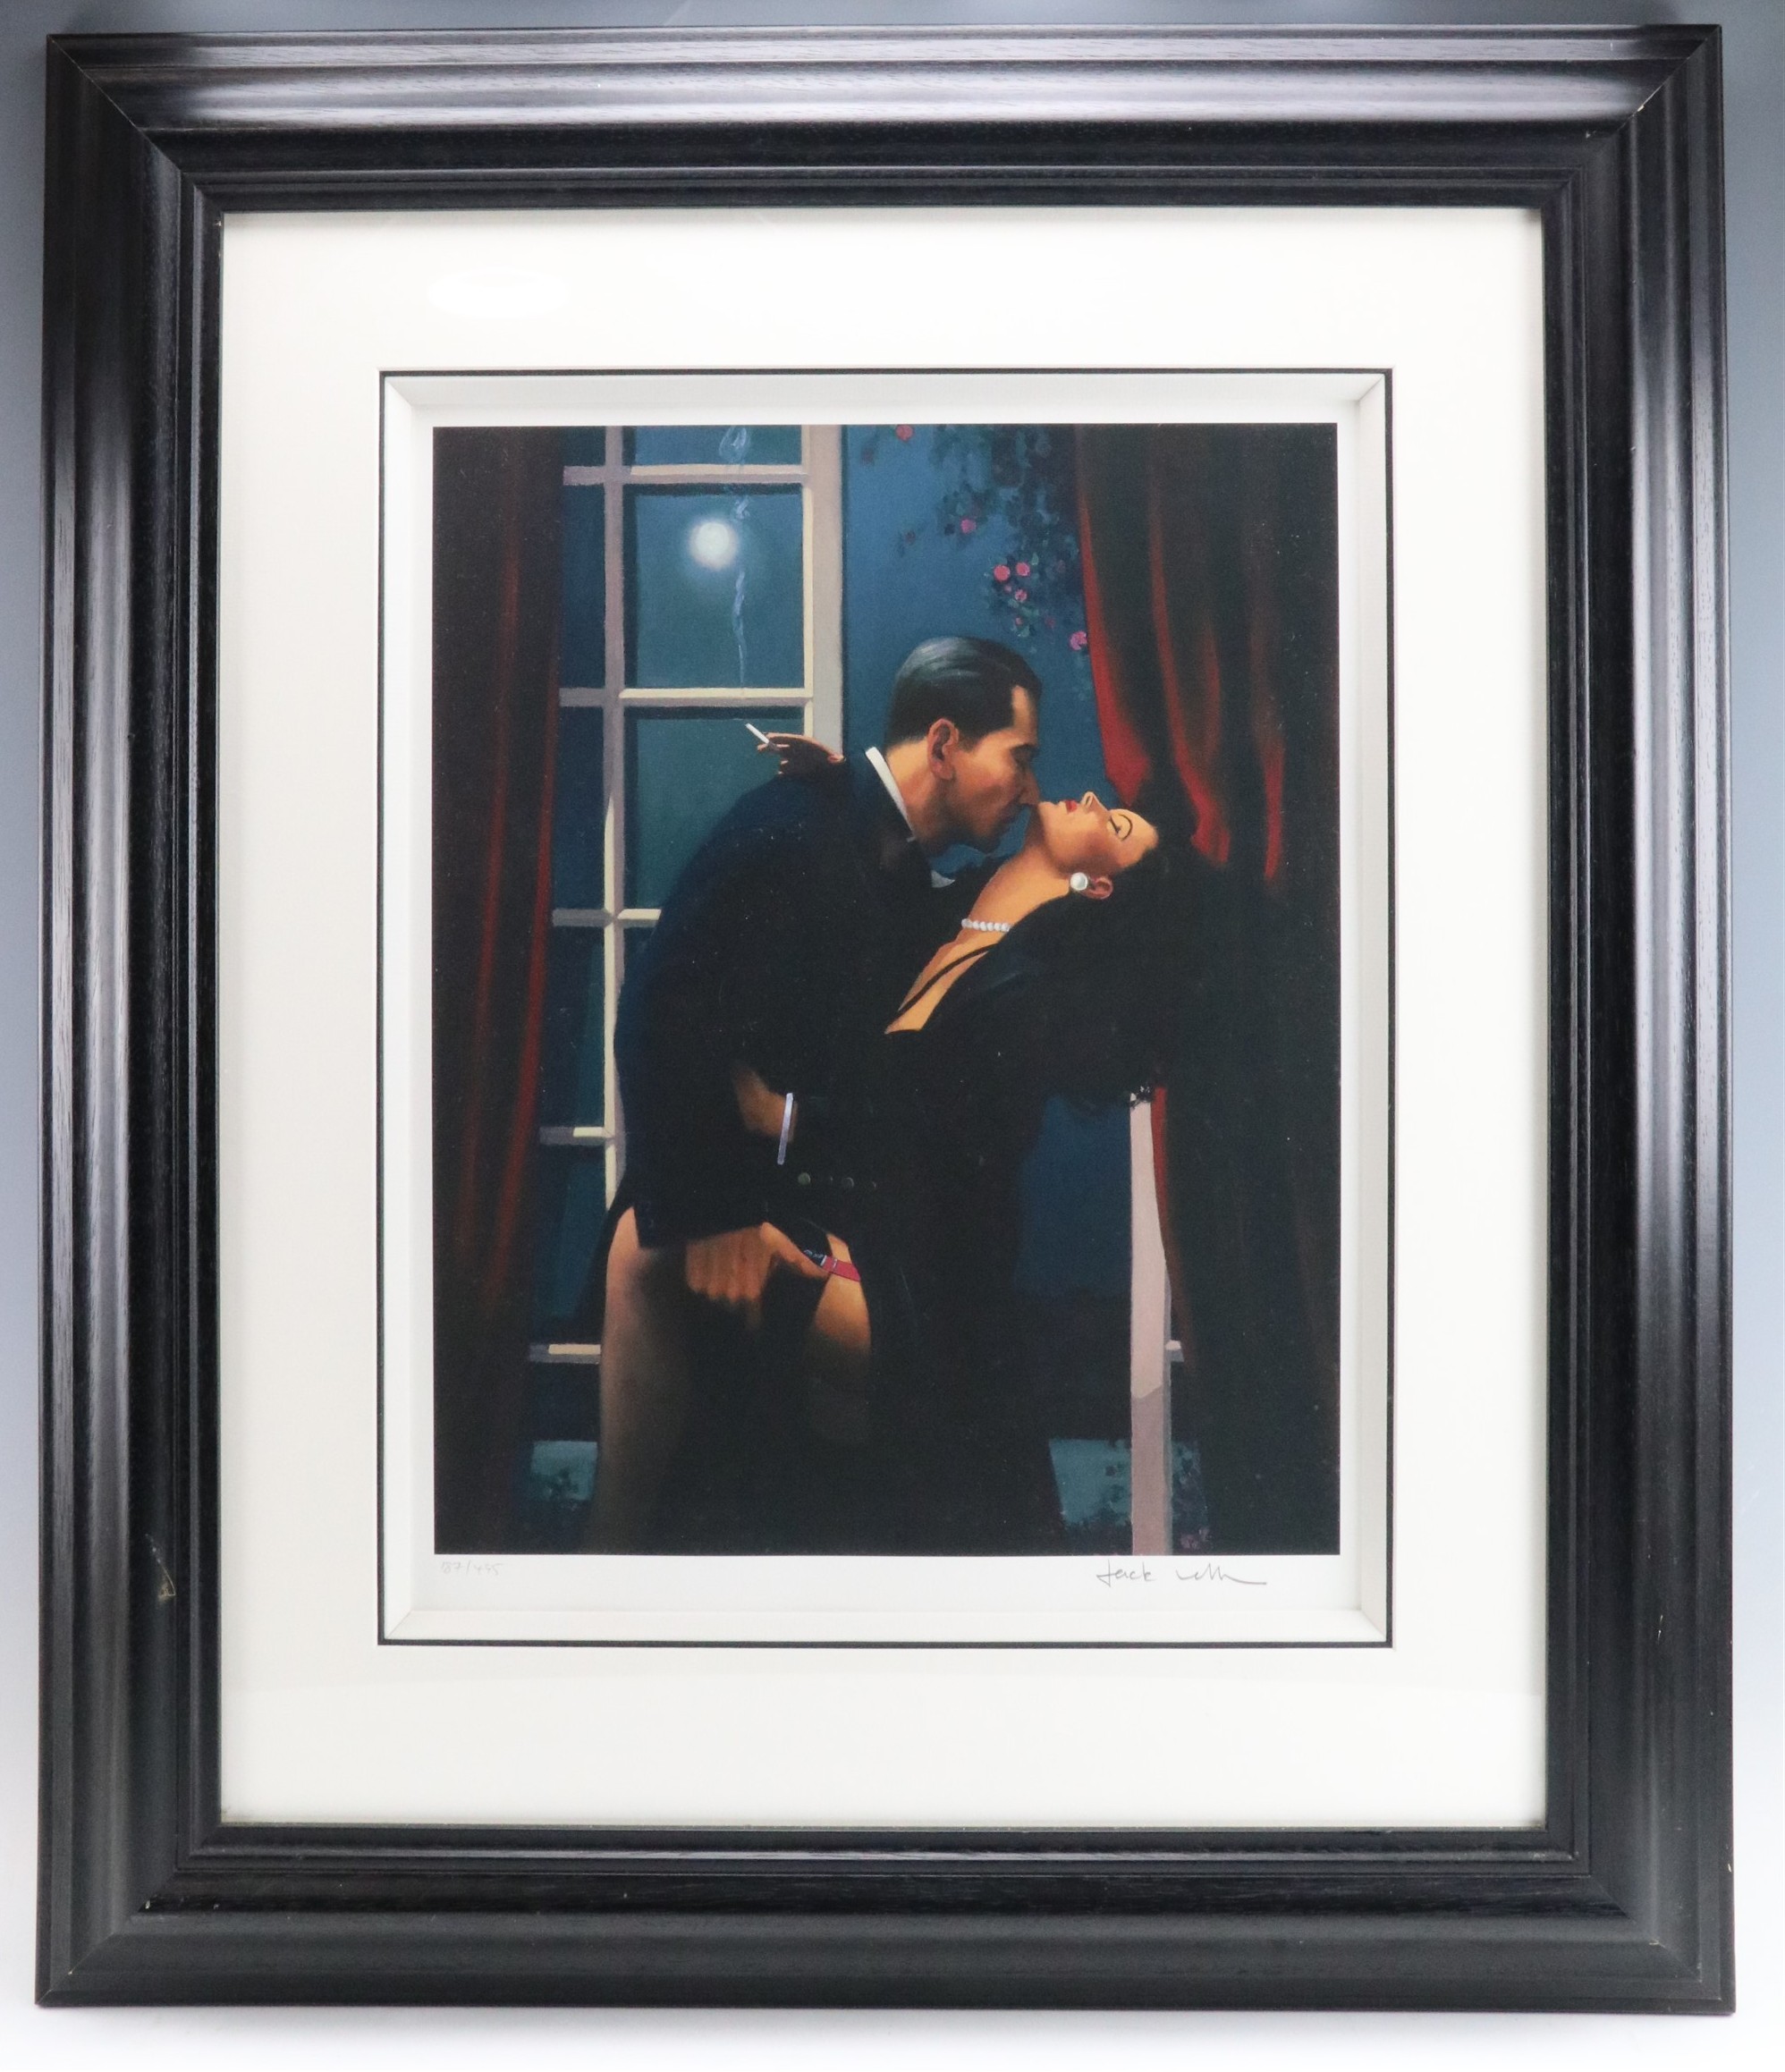 Jack Vettriano OBE (Contemporary) "Night Geometry", a film noir style portrayal of two lovers, - Image 2 of 2